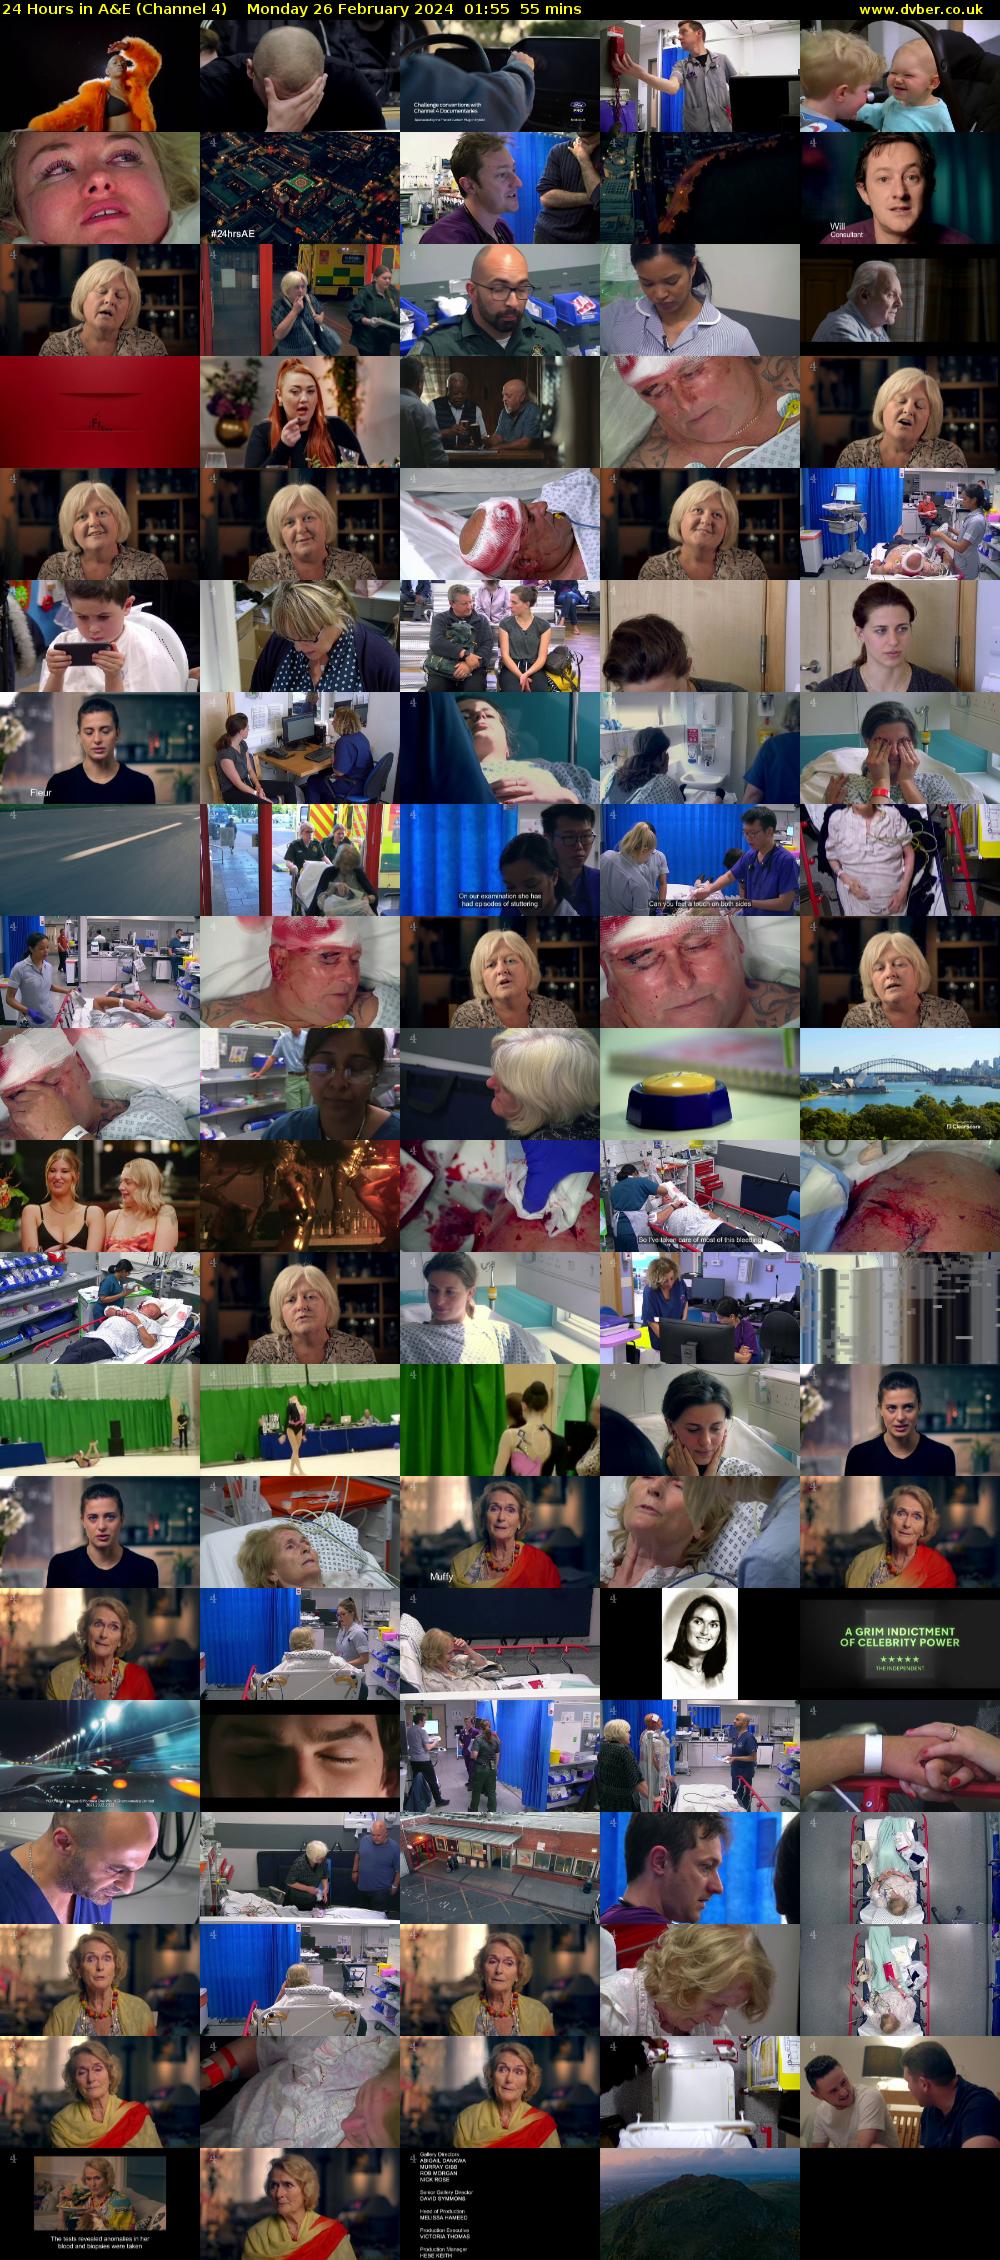 24 Hours in A&E (Channel 4) Monday 26 February 2024 01:55 - 02:50